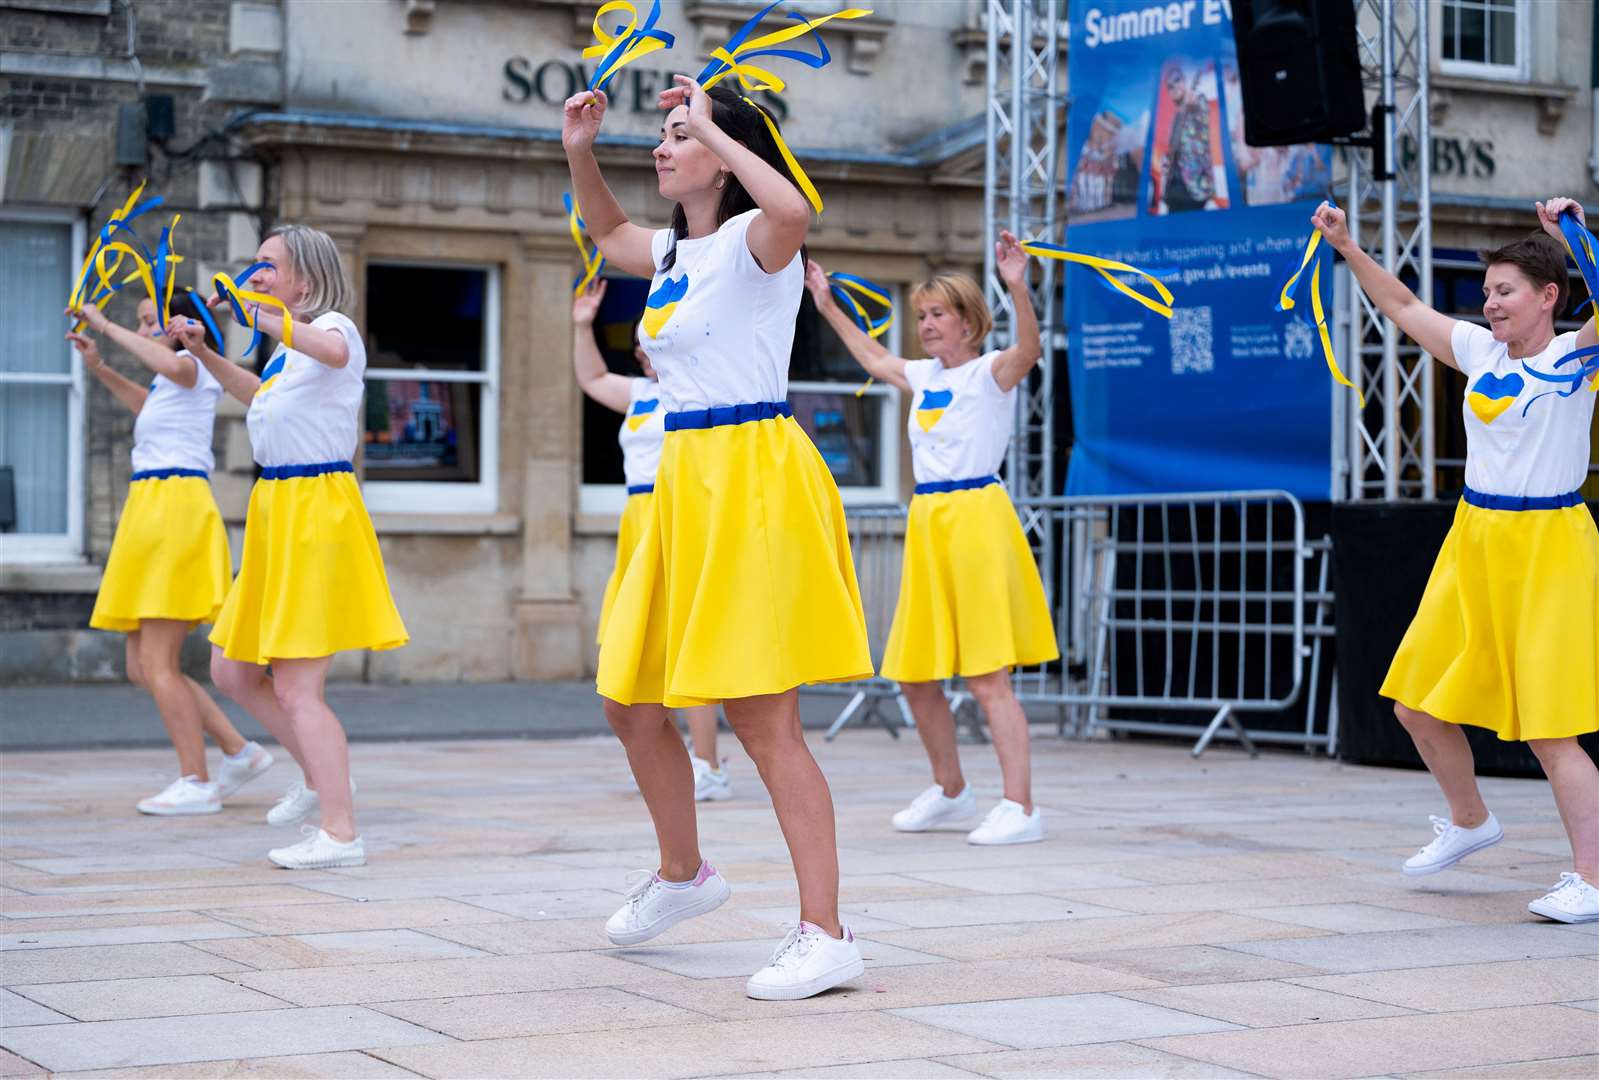 Dancers also performed for crowds at the event. Picture: Ian Burt